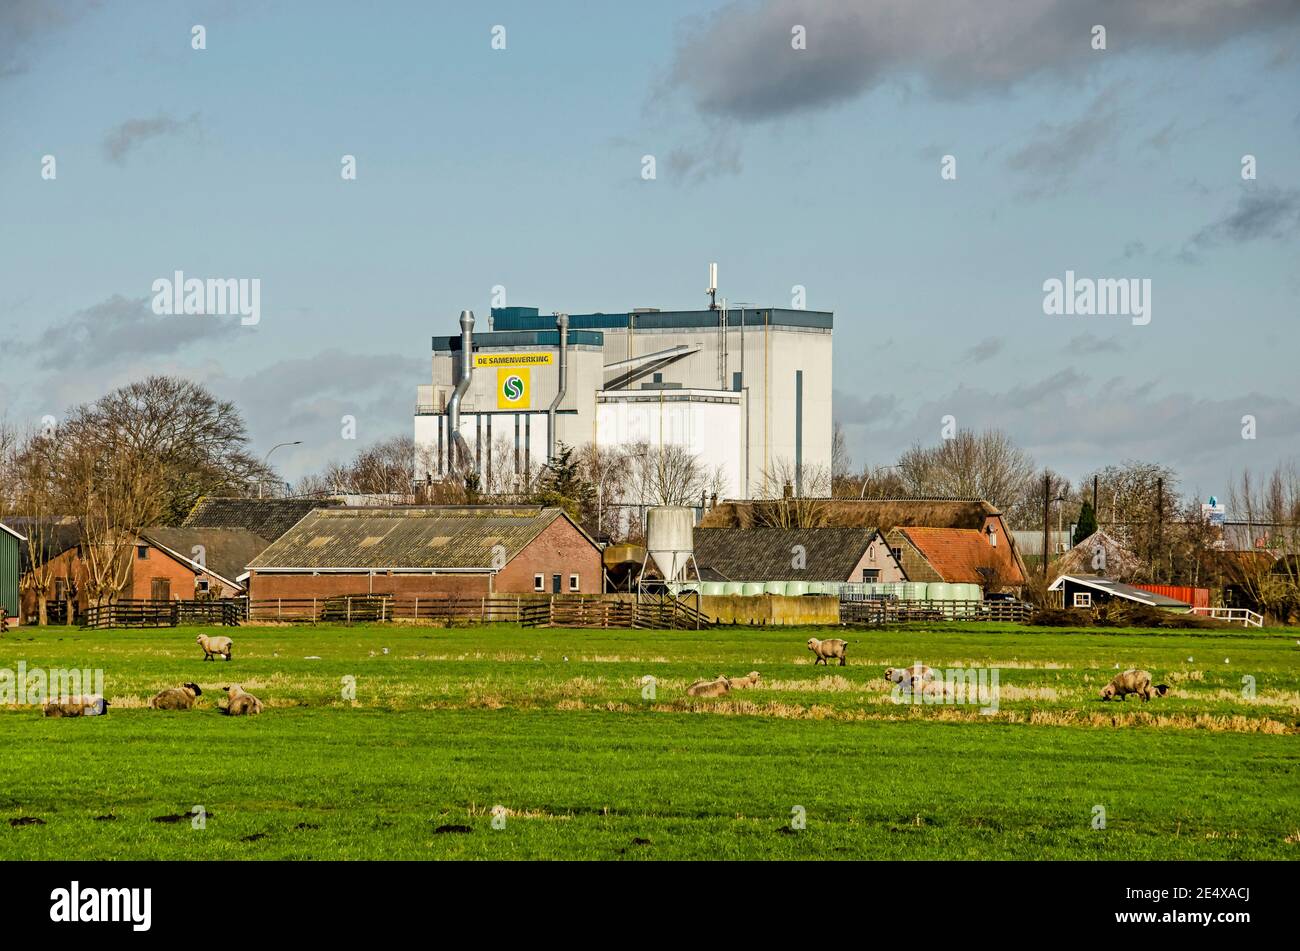 Haastrecht, The Netherlands, January 22, 2021: polder landscape with meadows, sheep, farm buildings and in the background the cattlefeed factory Stock Photo